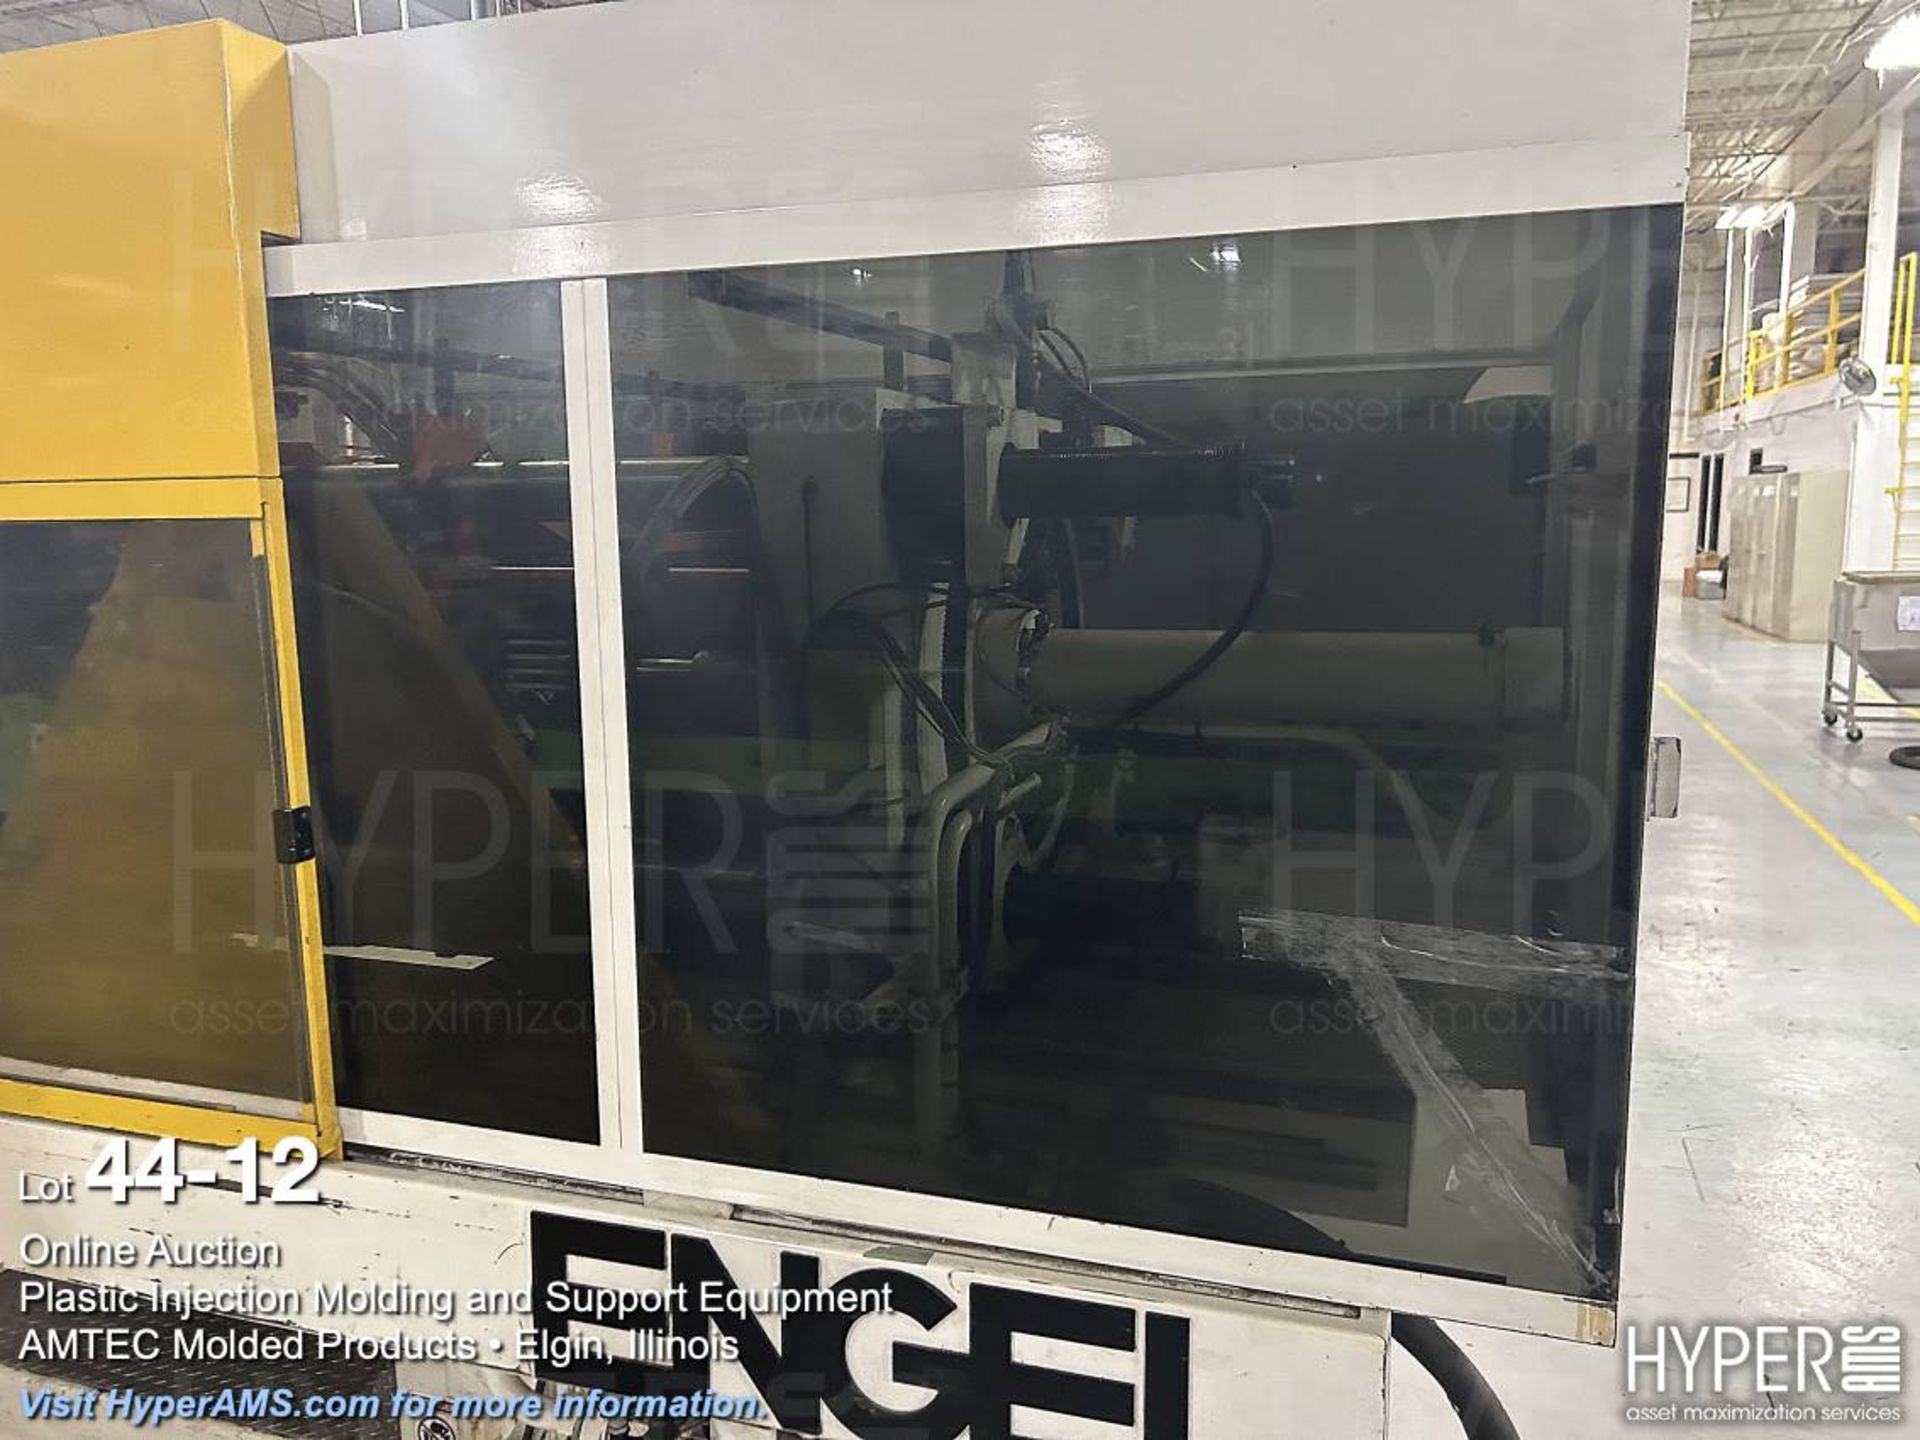 Engel ES750/200AH toggle clamp plastic injection molding machine - Image 12 of 16